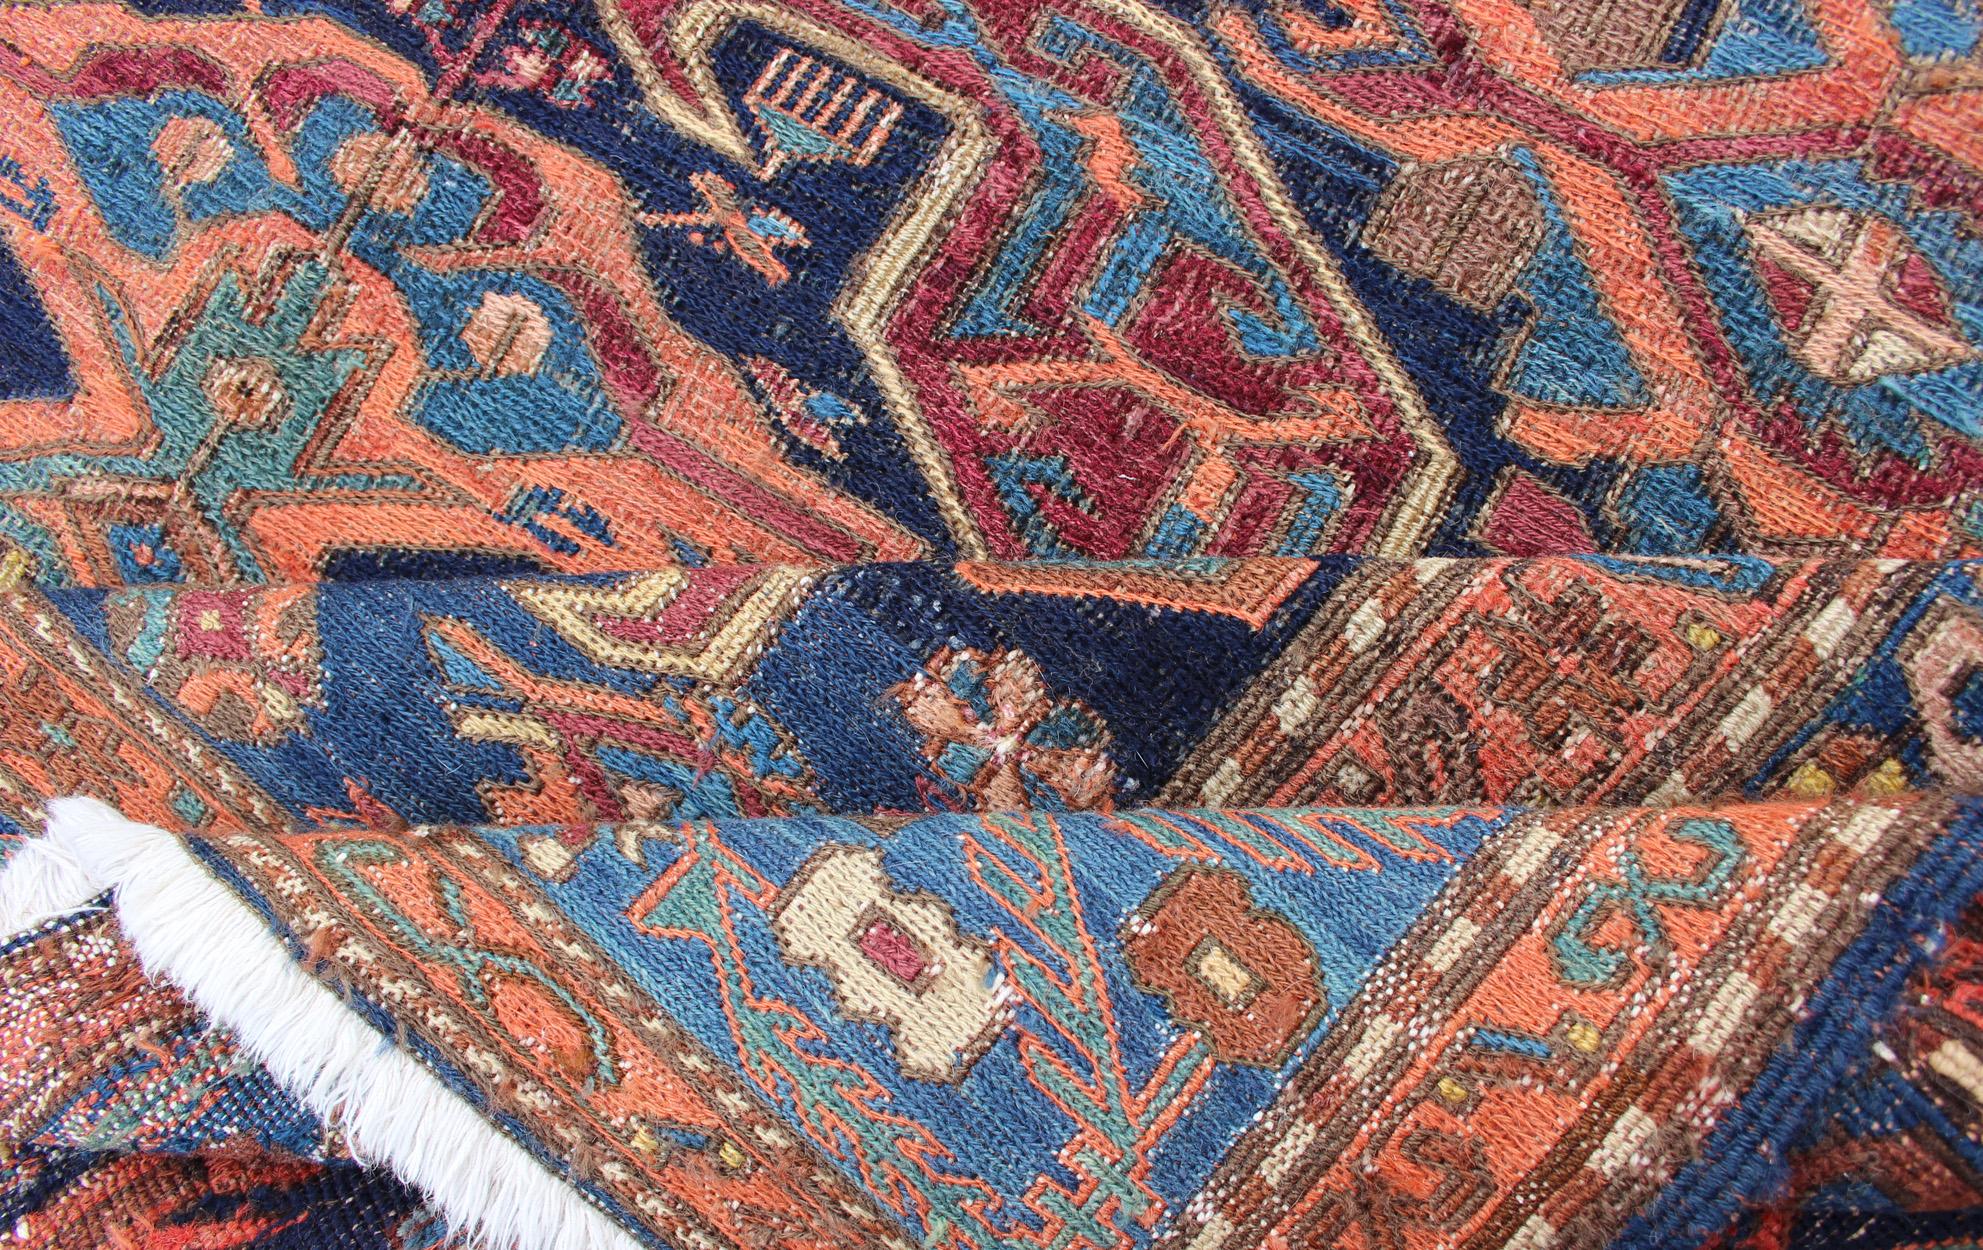 Persian Antique Caucasian 19th Century Sumac Rug in Varying Colors of Orange and Blue For Sale